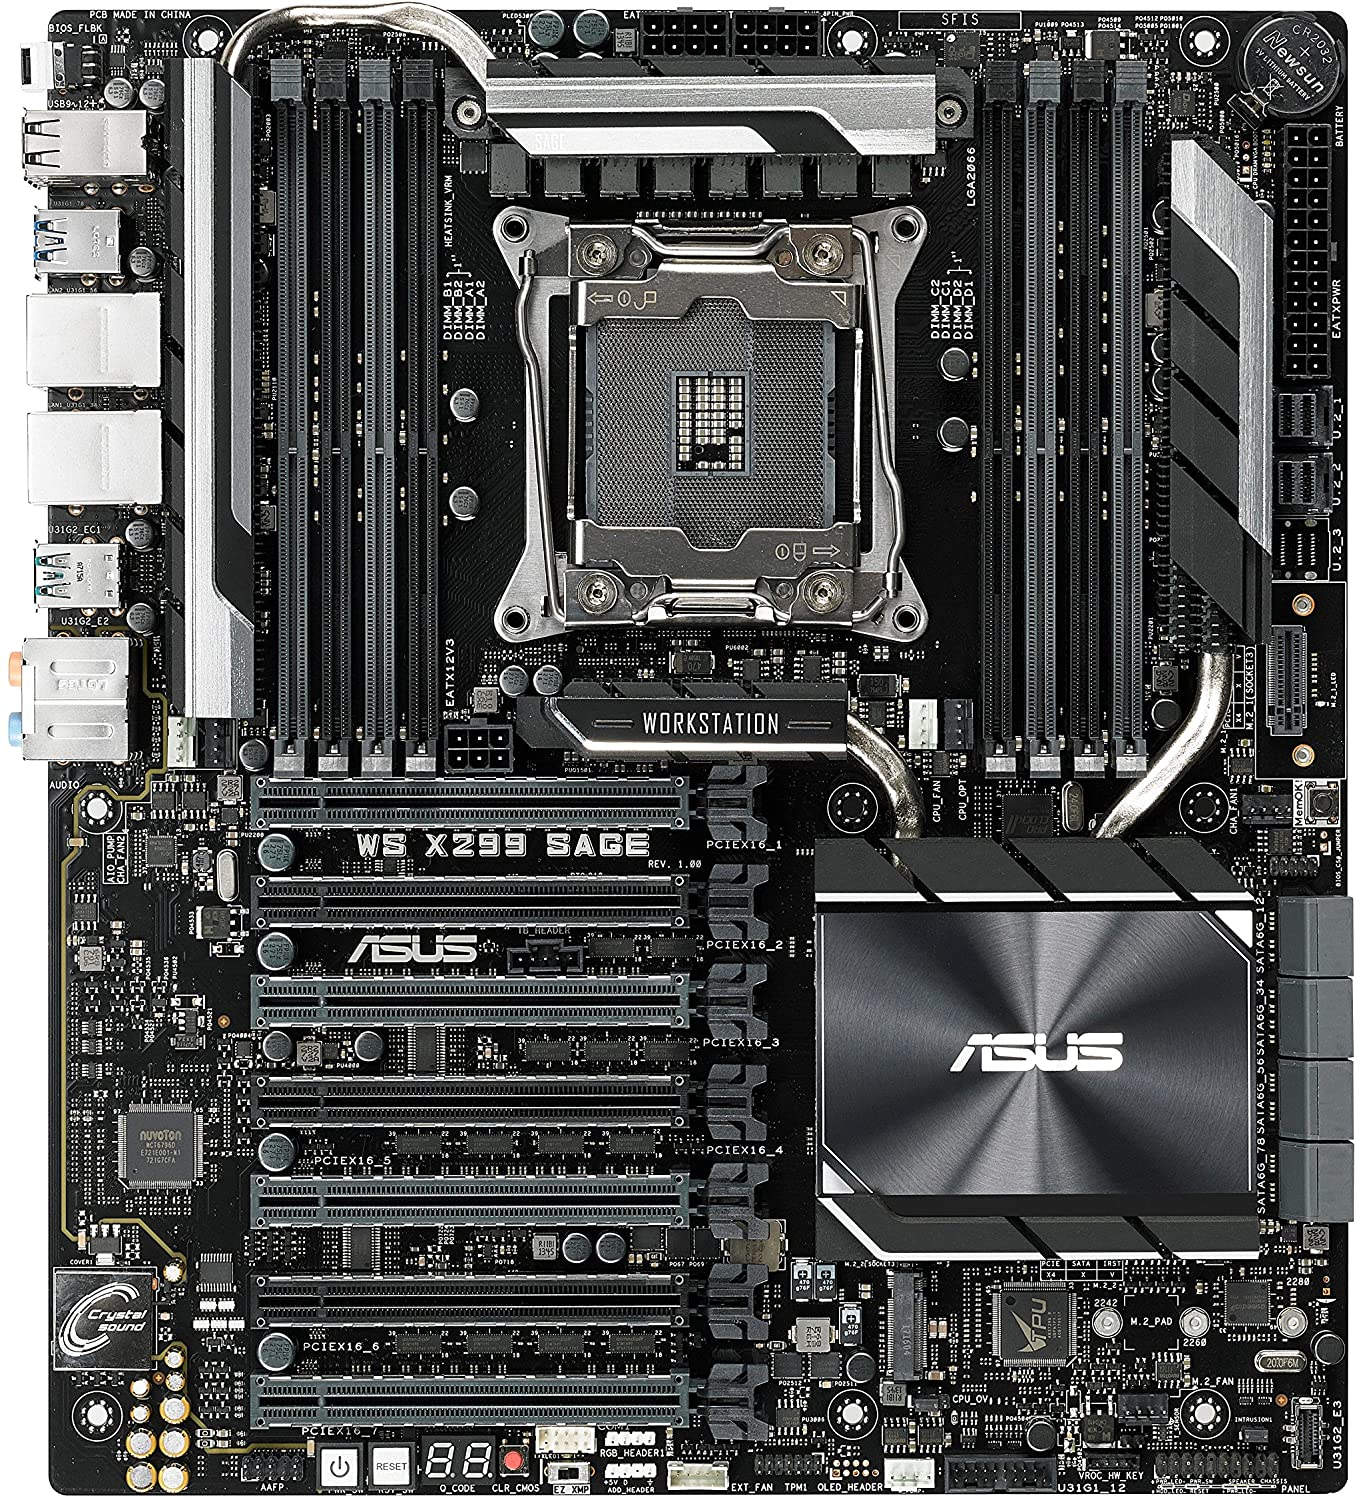  ASUS Motherboard with more than four RAM slots